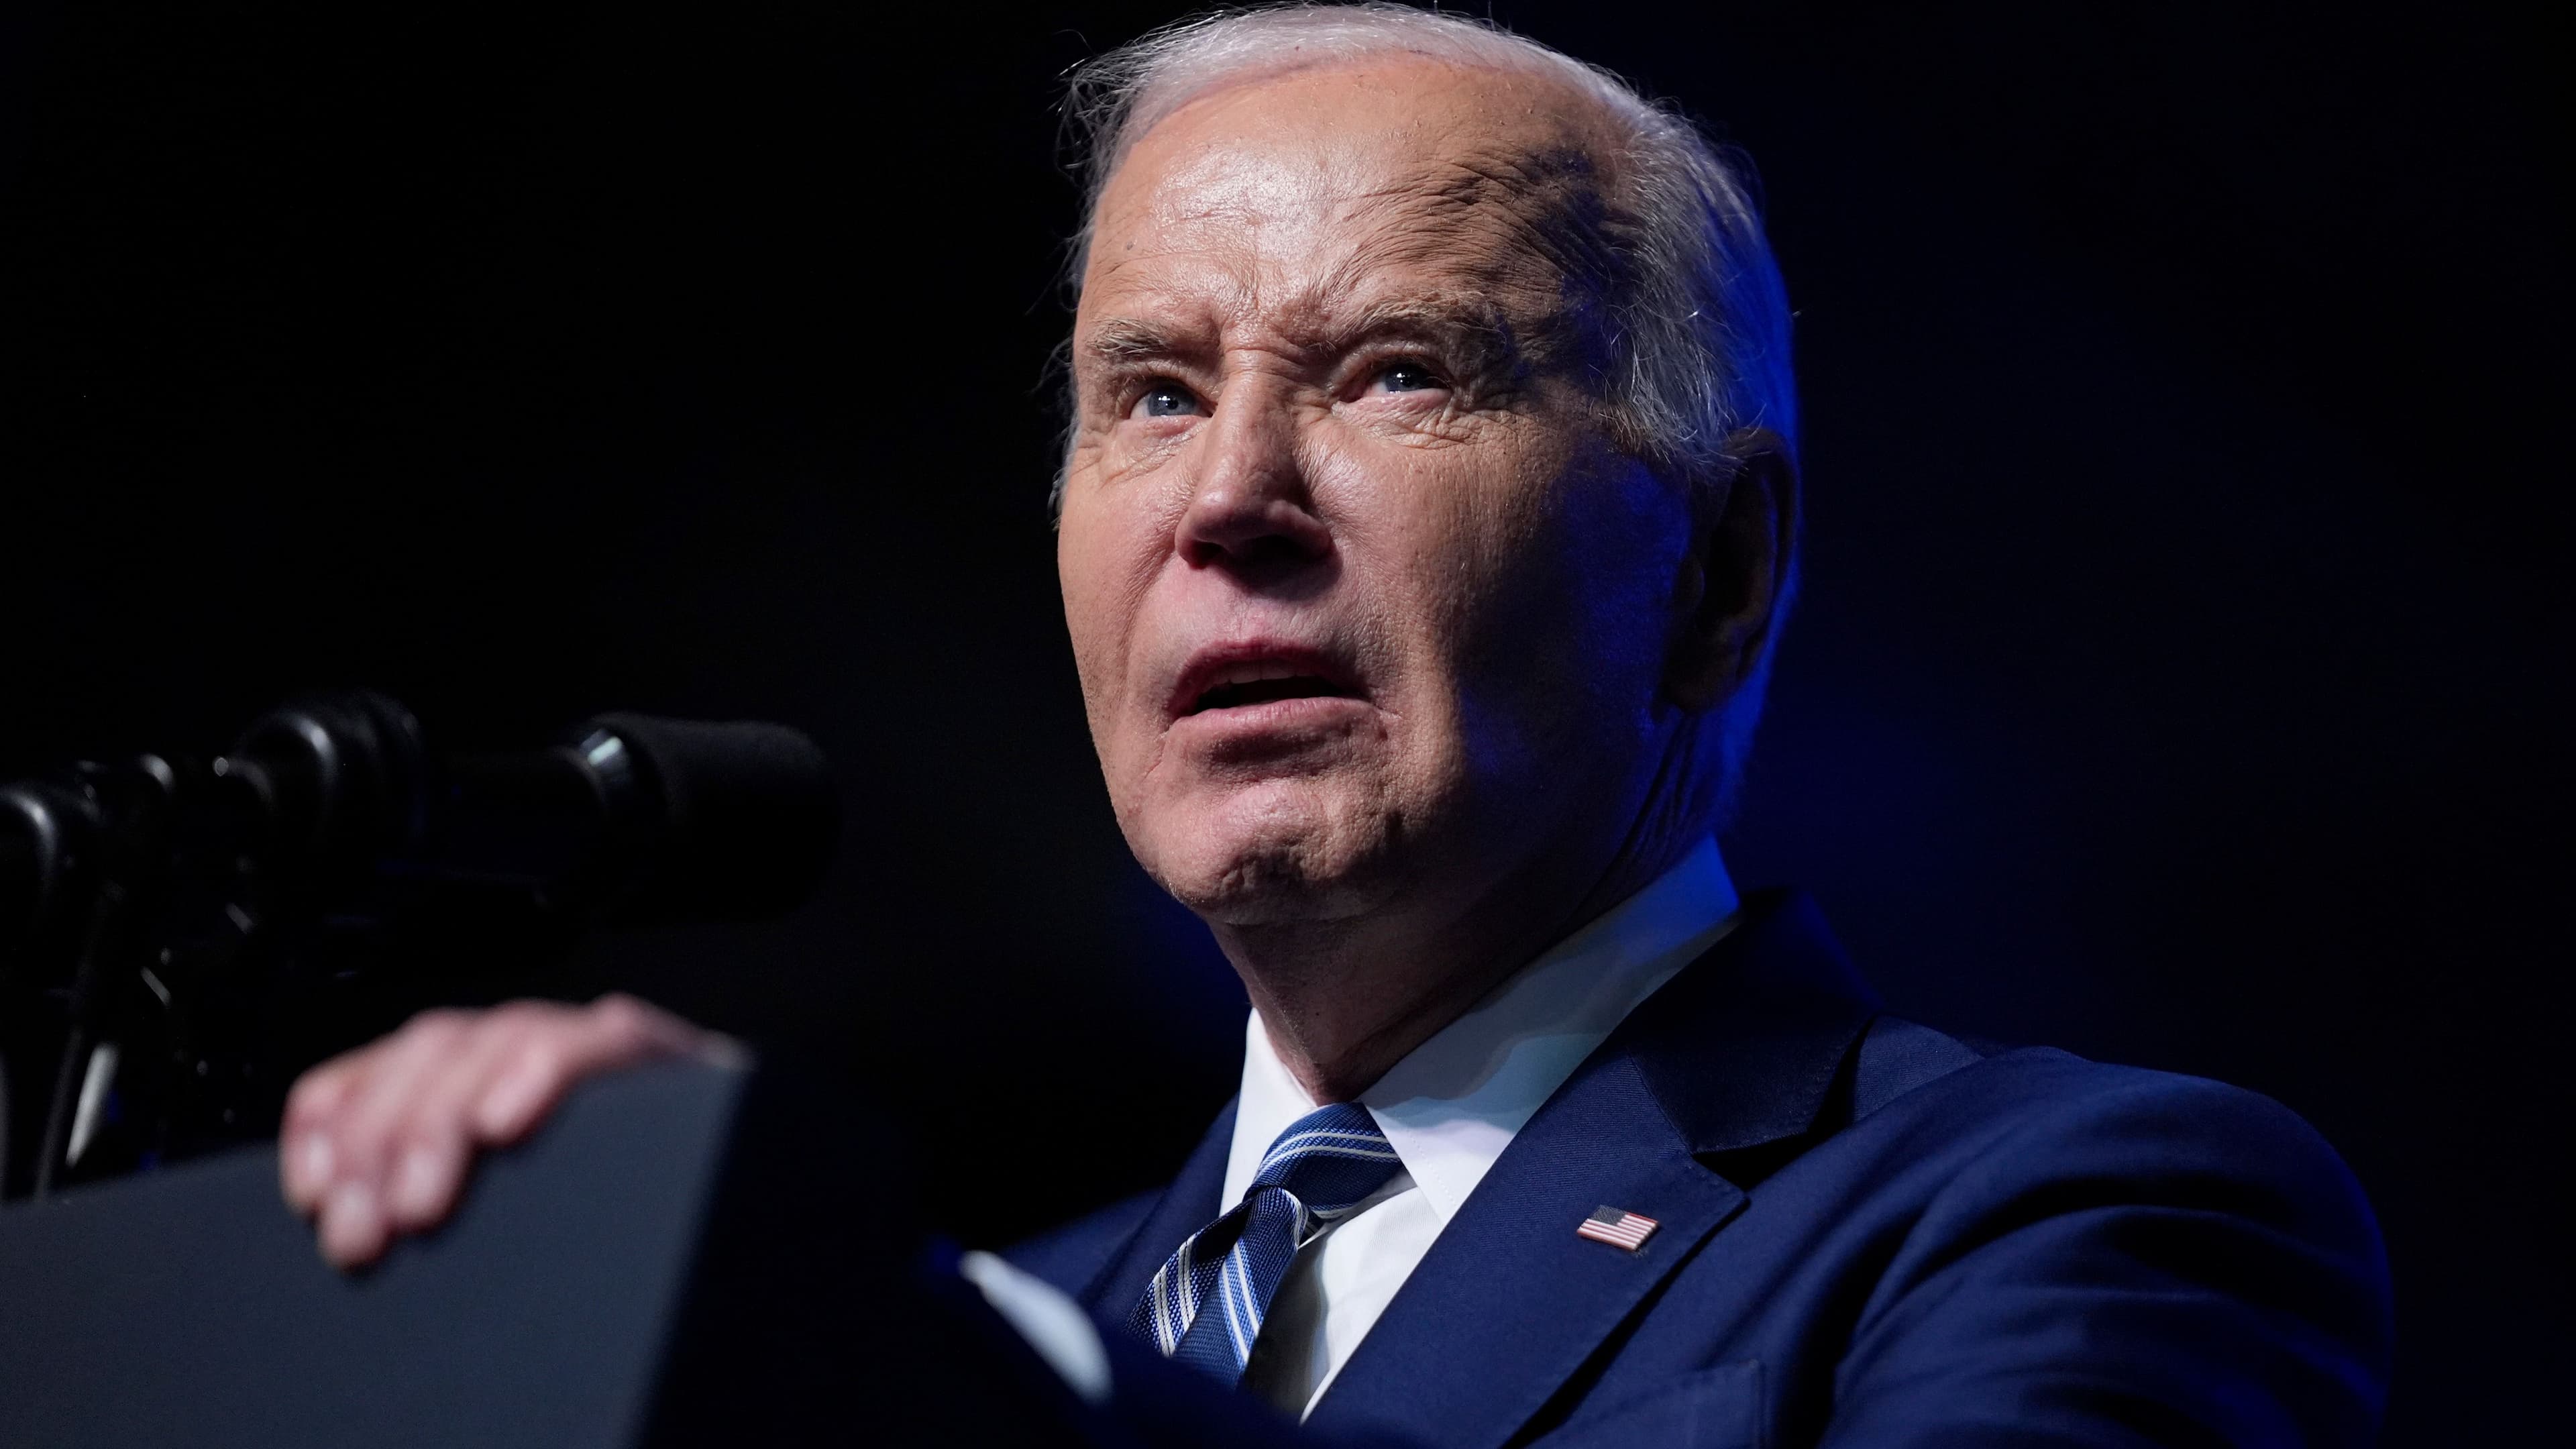 Biden's remarks come at a time when the US is reeling in the shadow of massive protests across universities with Israel-Hamas war unfolding on college campuses.